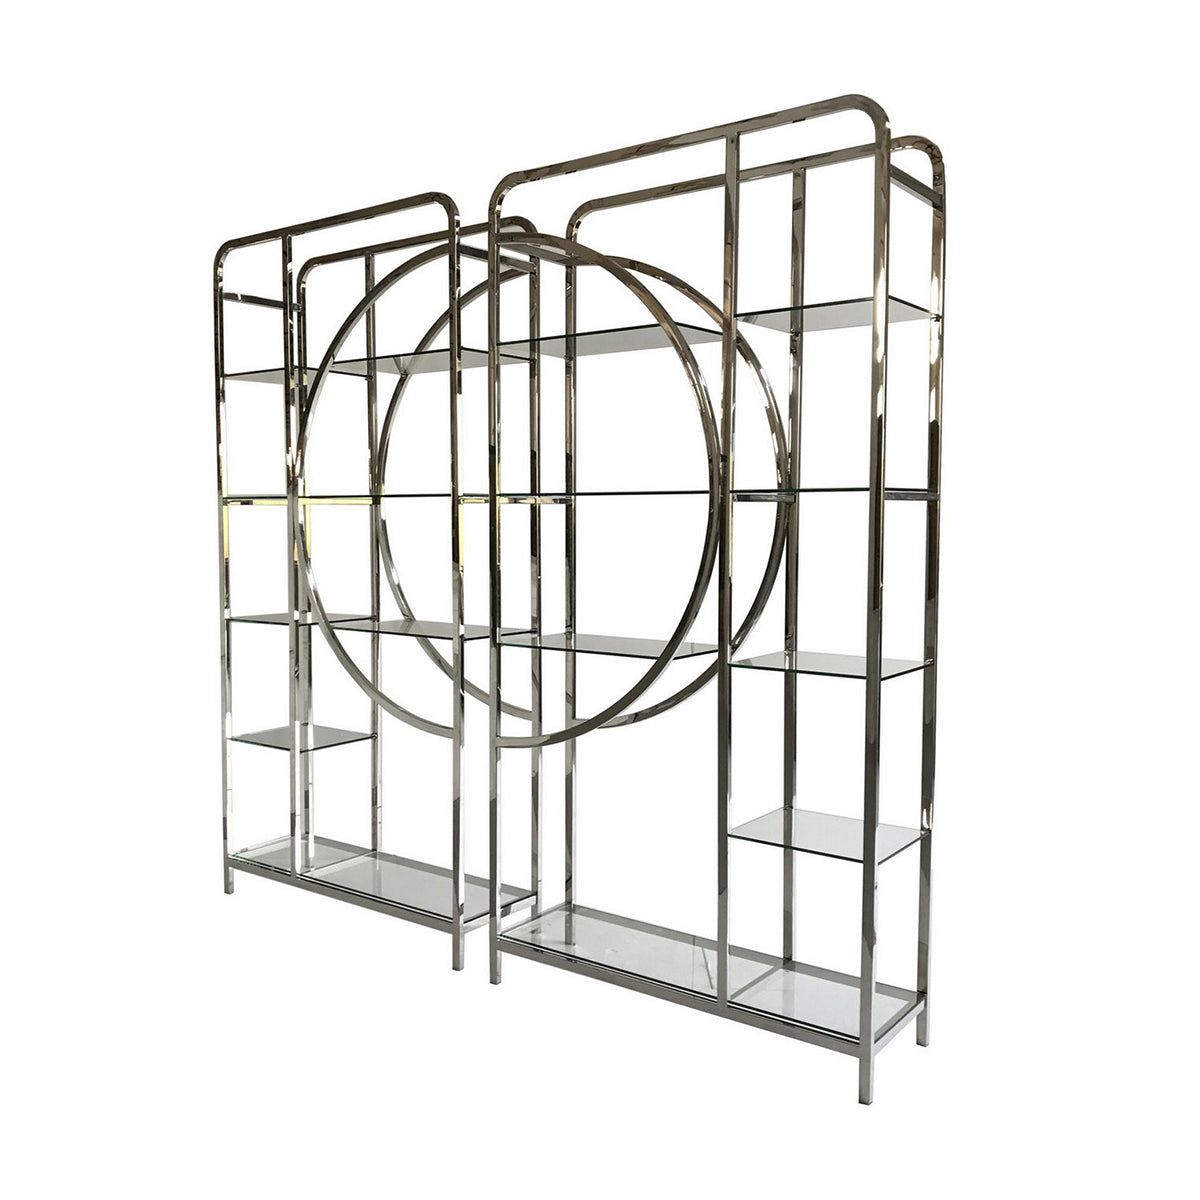 Gatsby Steel Decadence Shelving Units (Set of 2) ( DISPLAY ONLY)